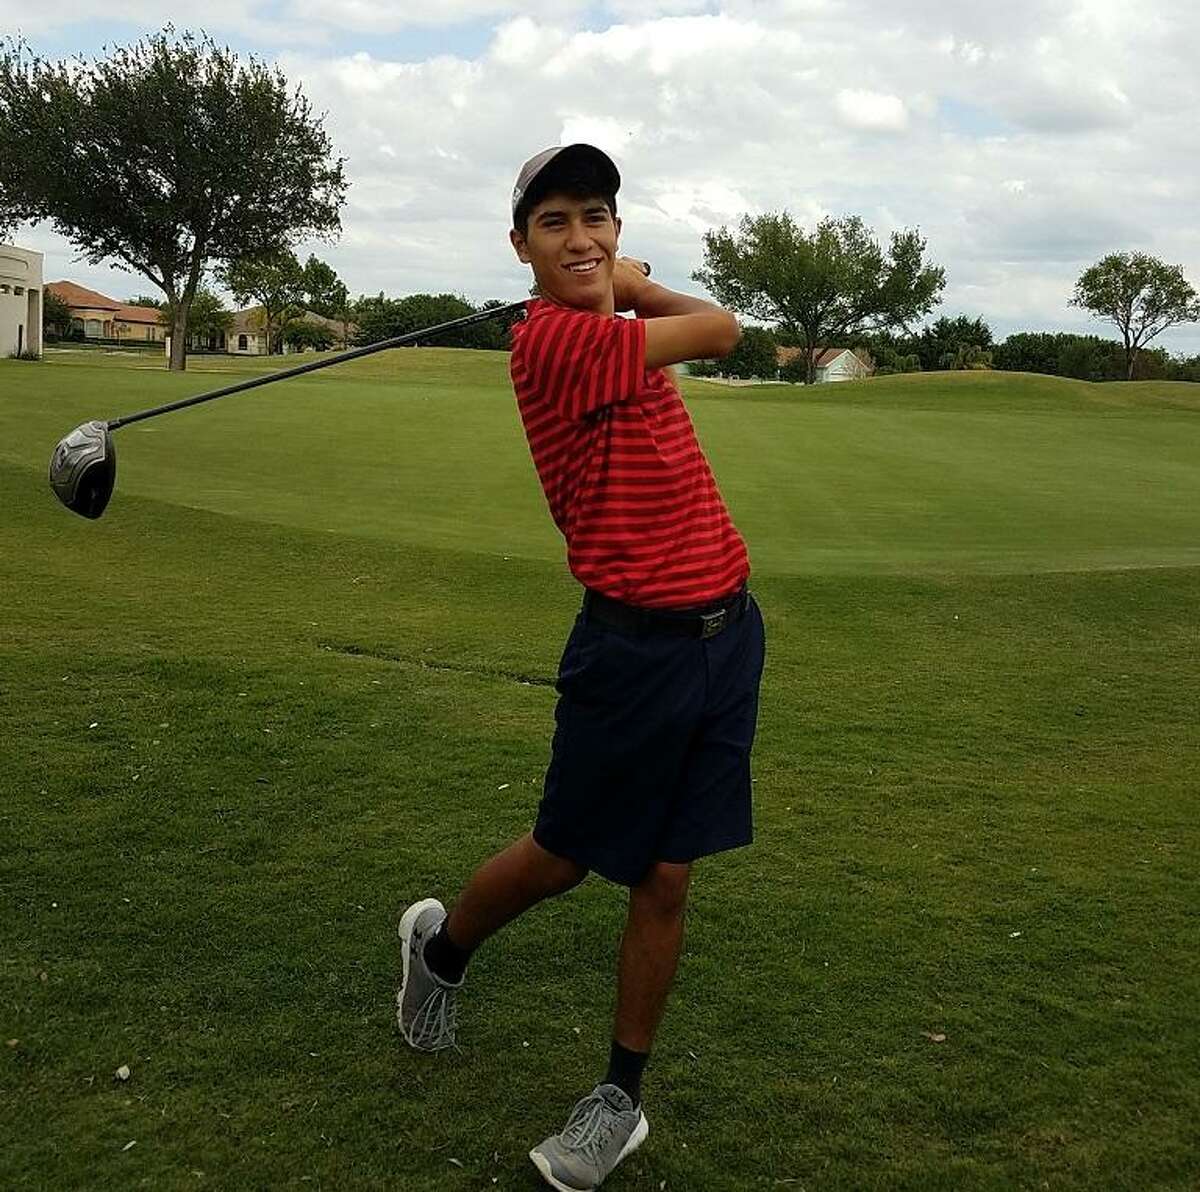 Martin sophomore Felix Gamez tied for fourth place at the District 31-5A meet and won a playoff to qualify for the regional tournament.